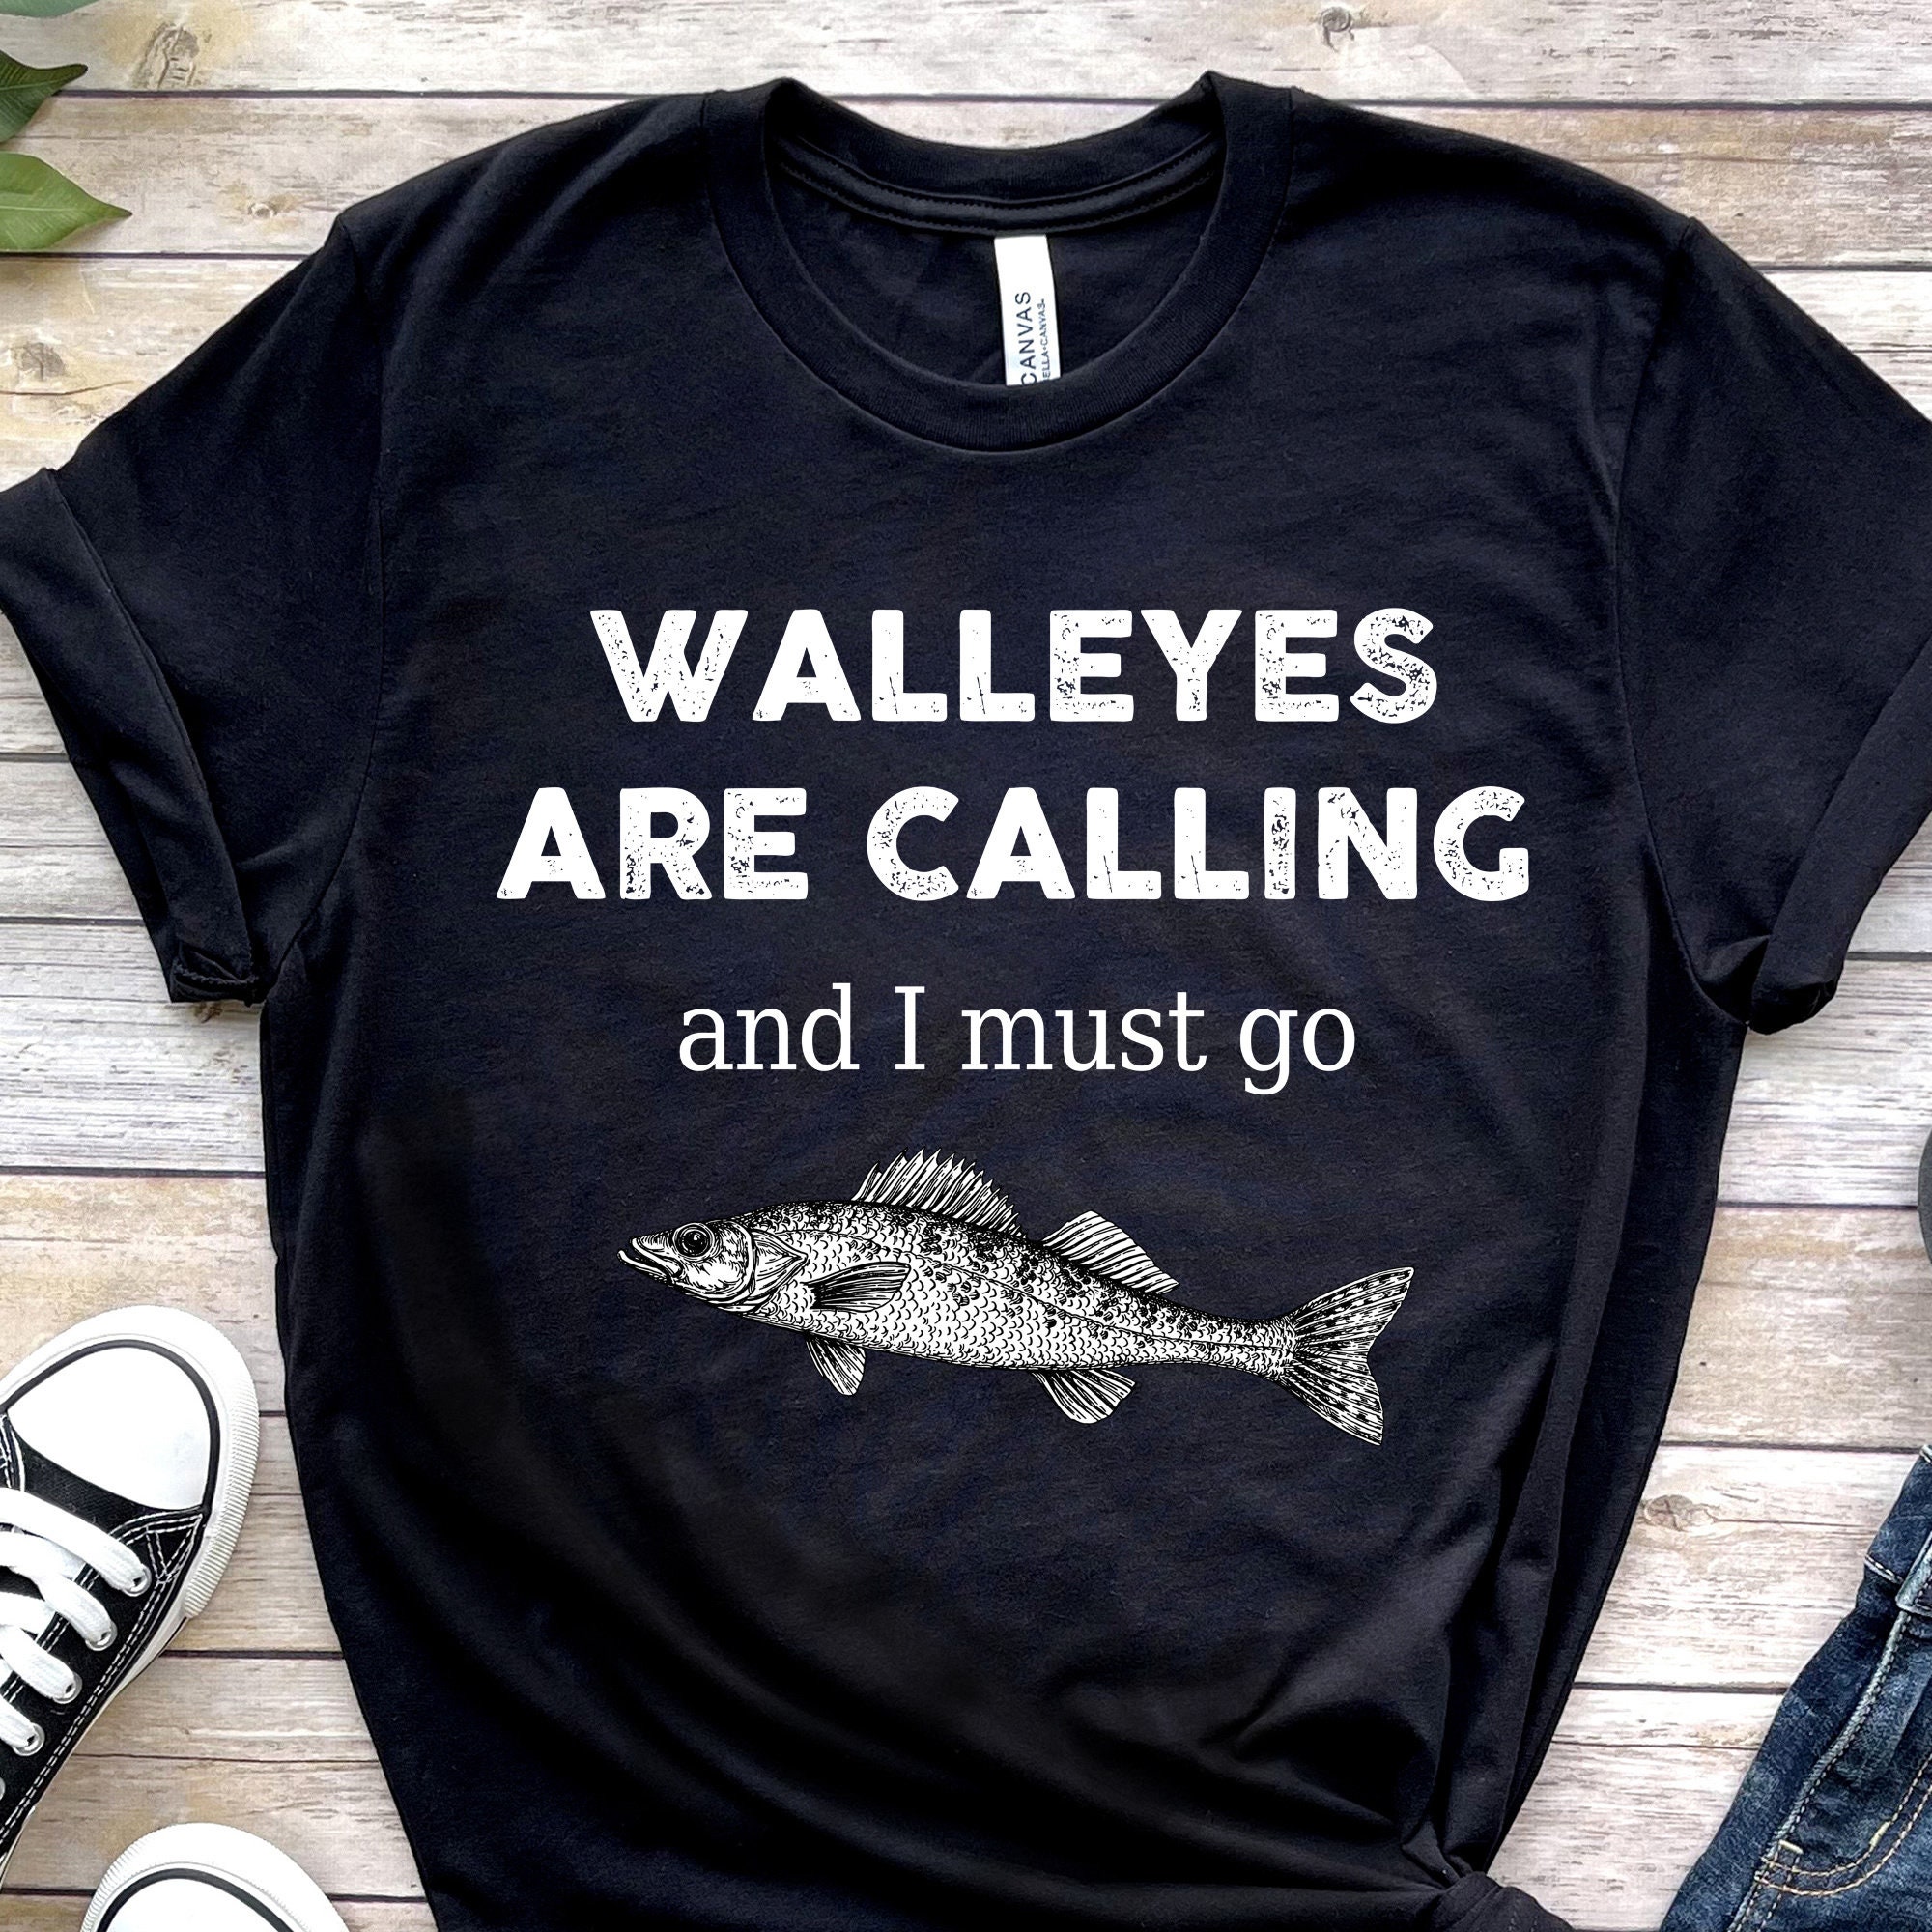 Walleye Fishing Apparel Coral. Yizzam.com, where all the street stopping  style t-shirts go!  Looking for a funny t-shirt, a cool t-shirt, a crazy  t-shirt? Come inside now, you beautiful tee shirt